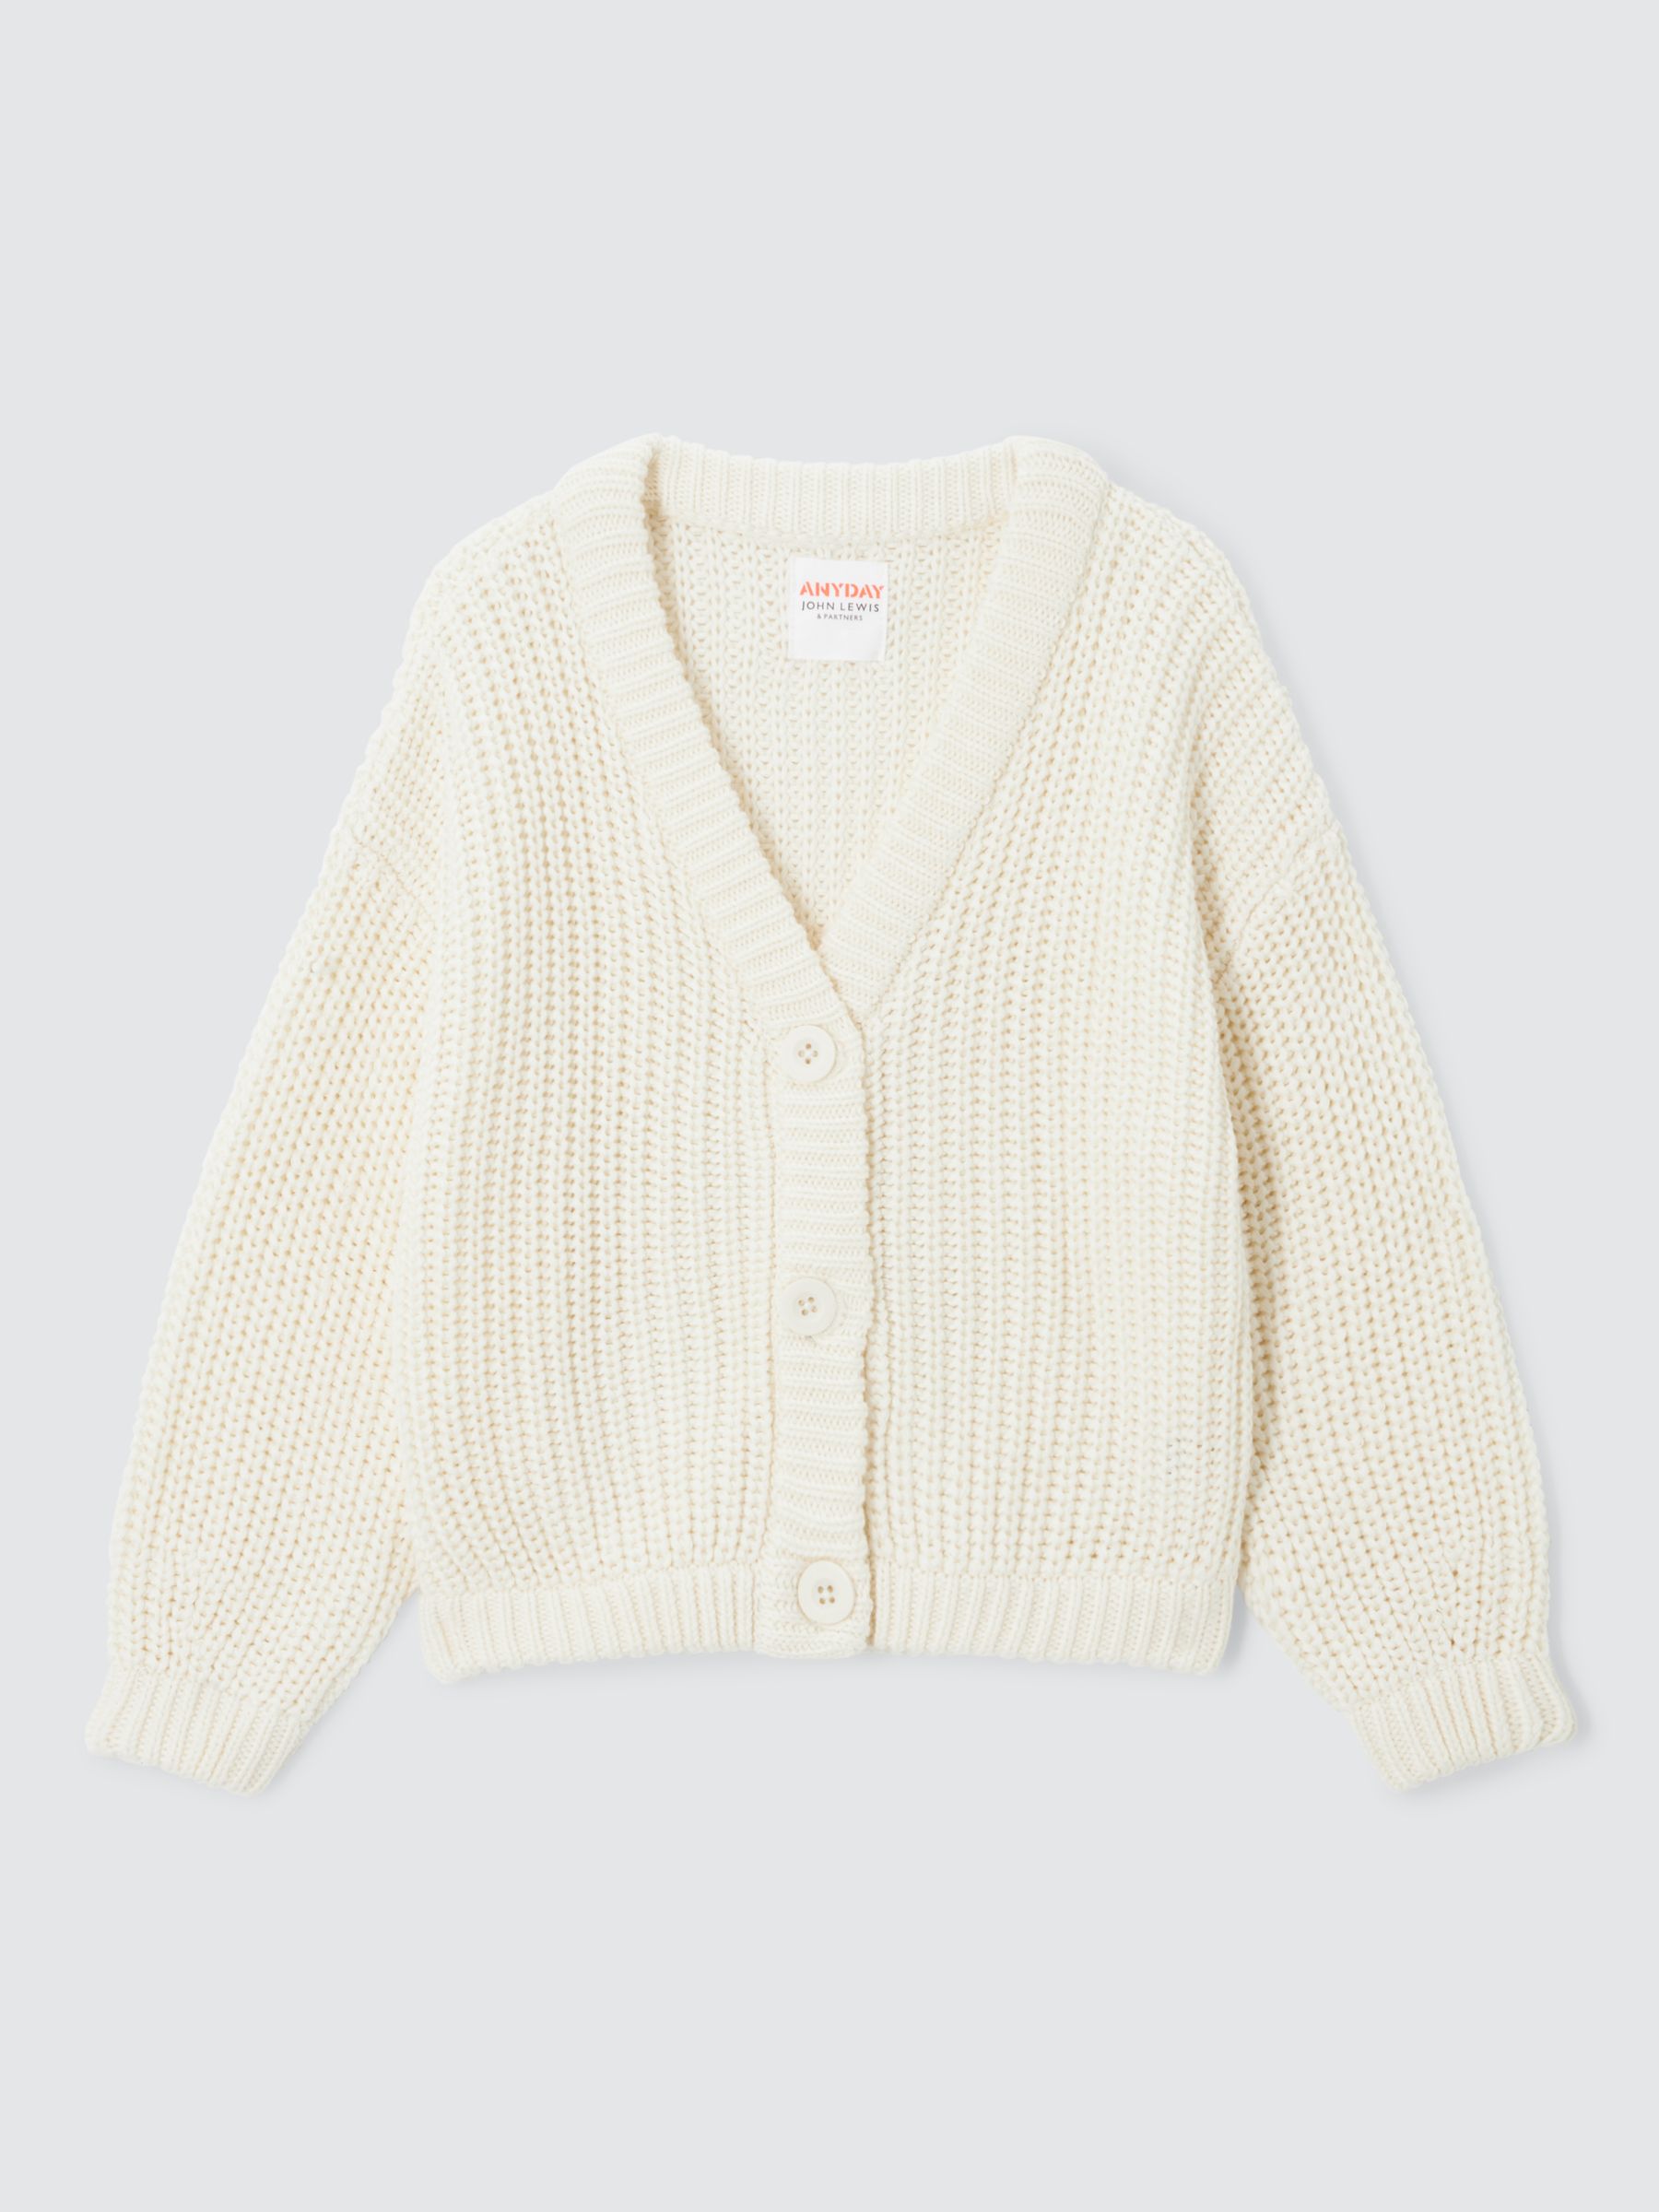 John Lewis ANYDAY Kids' Chunky Knit Cardigan, Off White, 9 years